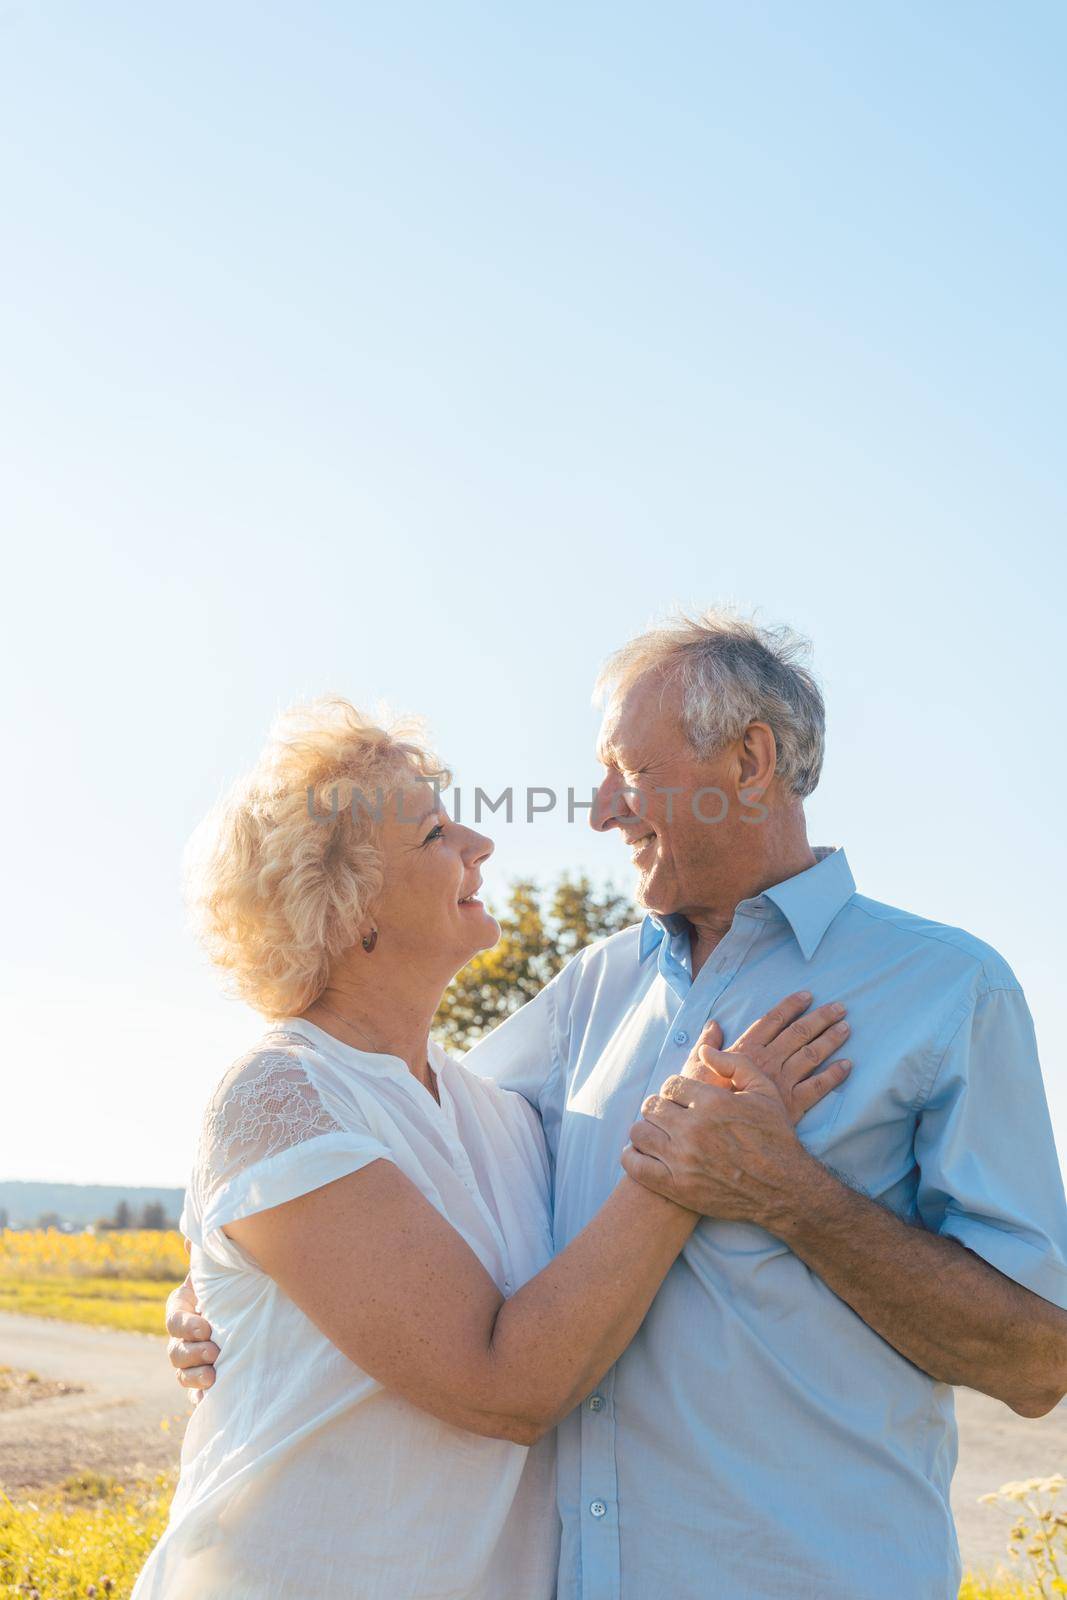 Low-angle view of a romantic elderly couple enjoying health and nature while standing together on a field in a sunny day of summer